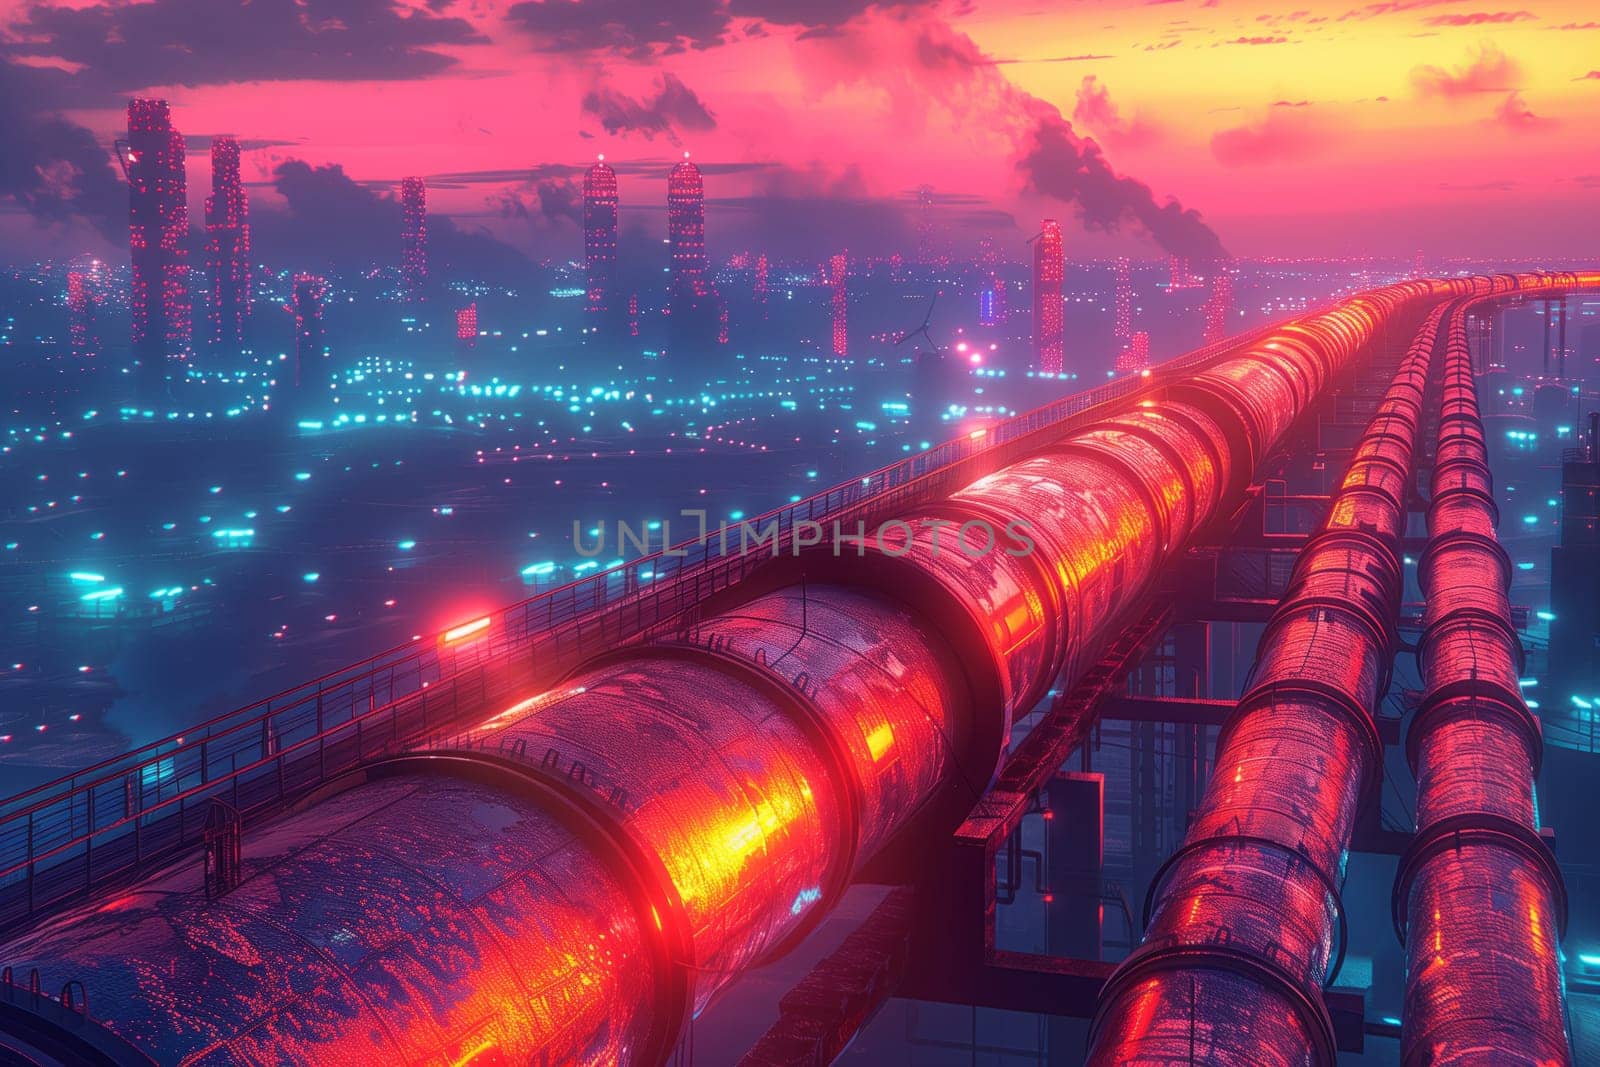 A network of pipes snakes through the city, under the night sky filled with magenta clouds, connecting the world of gas and water